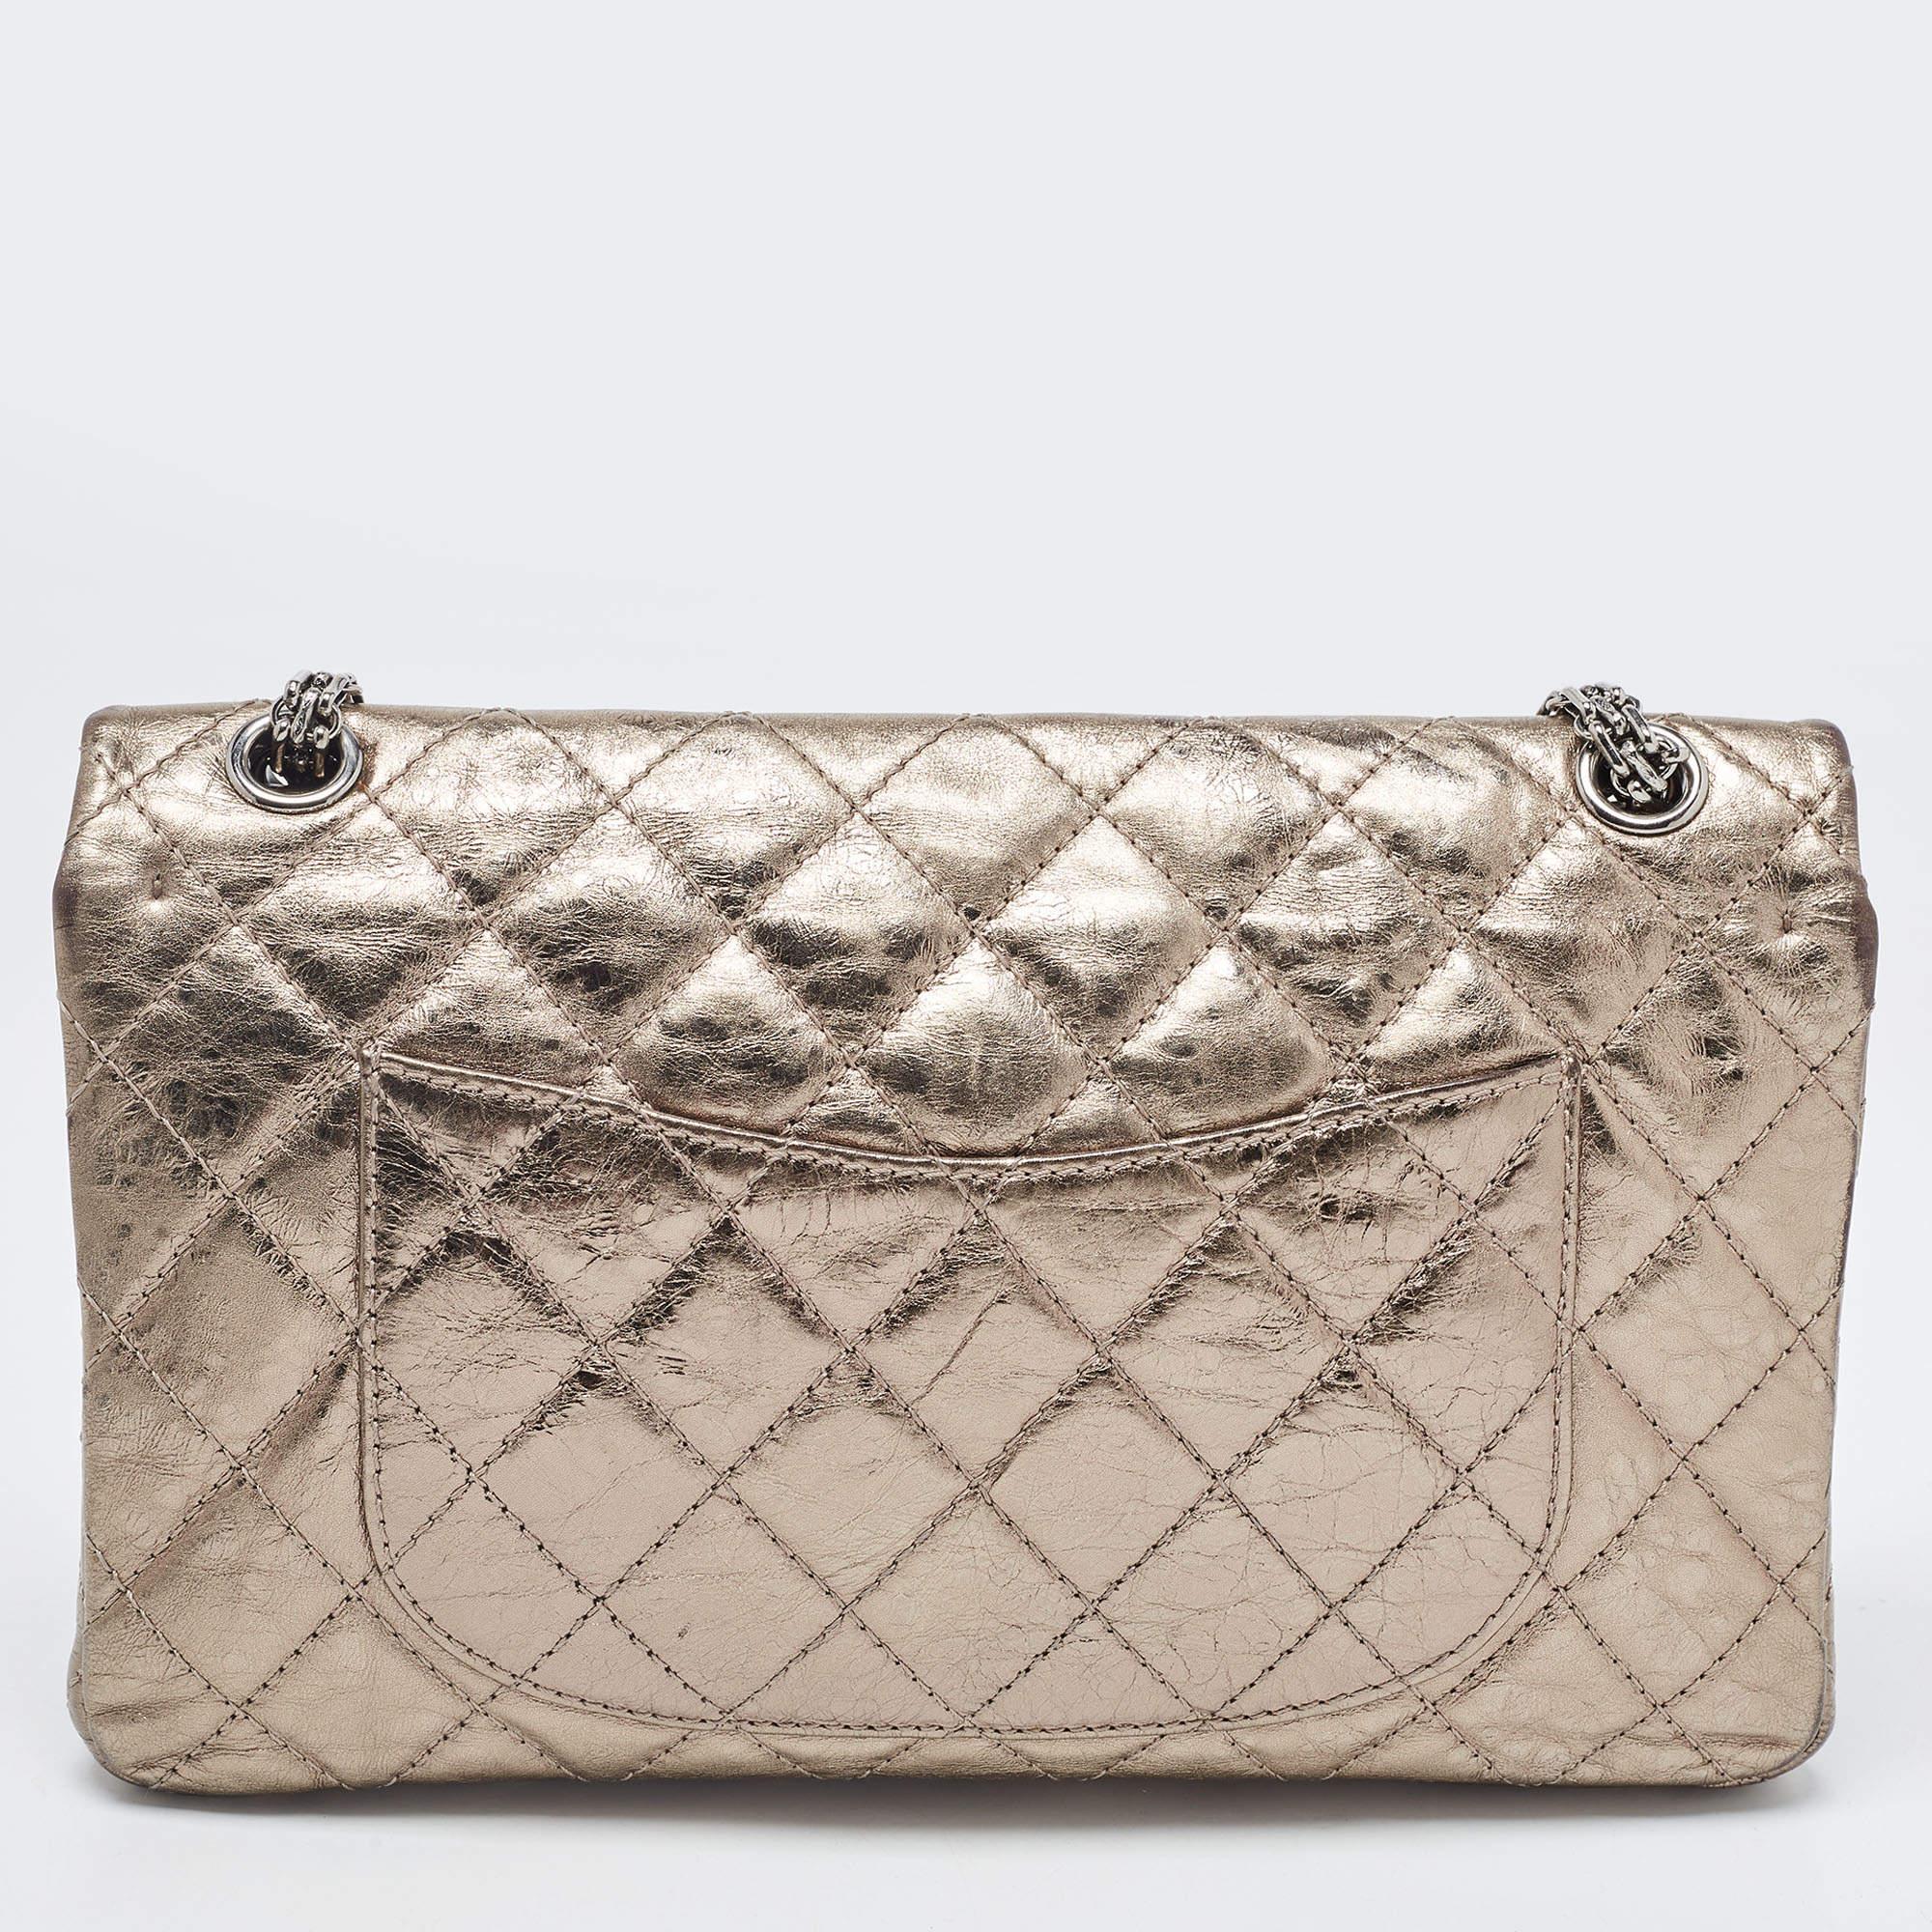 Chanel Metallic Quilted Aged Leather Reissue 2.55 Classic 226 Flap Bag For Sale 4